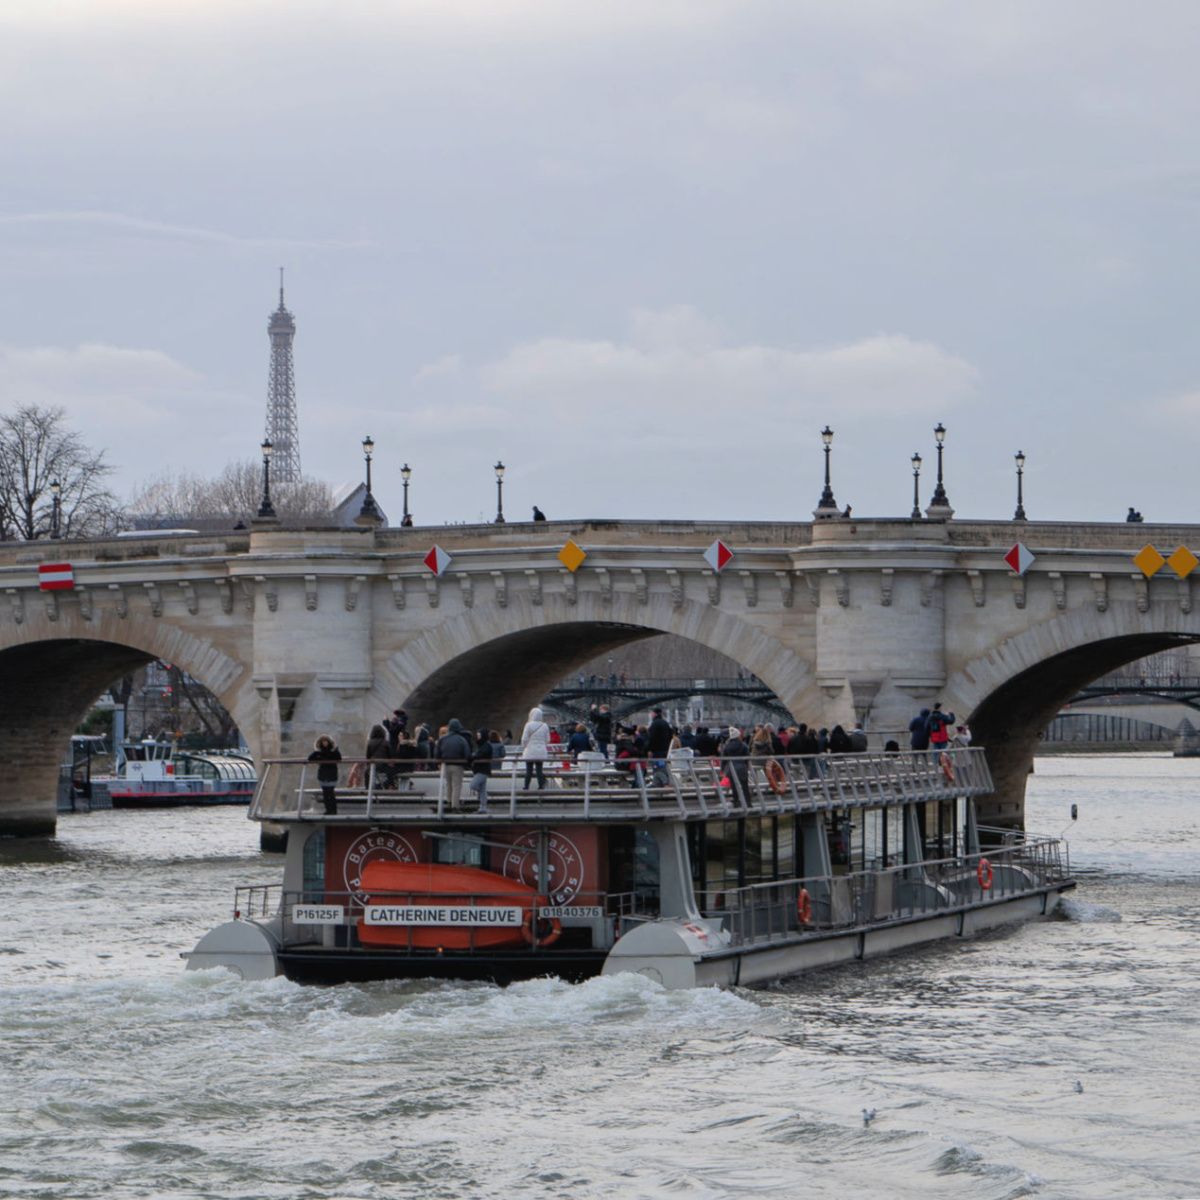 Paris: tour boat on the Seine named "Catherine Deneuve" with Eiffel tower in background. More at une femme d'un certain age.